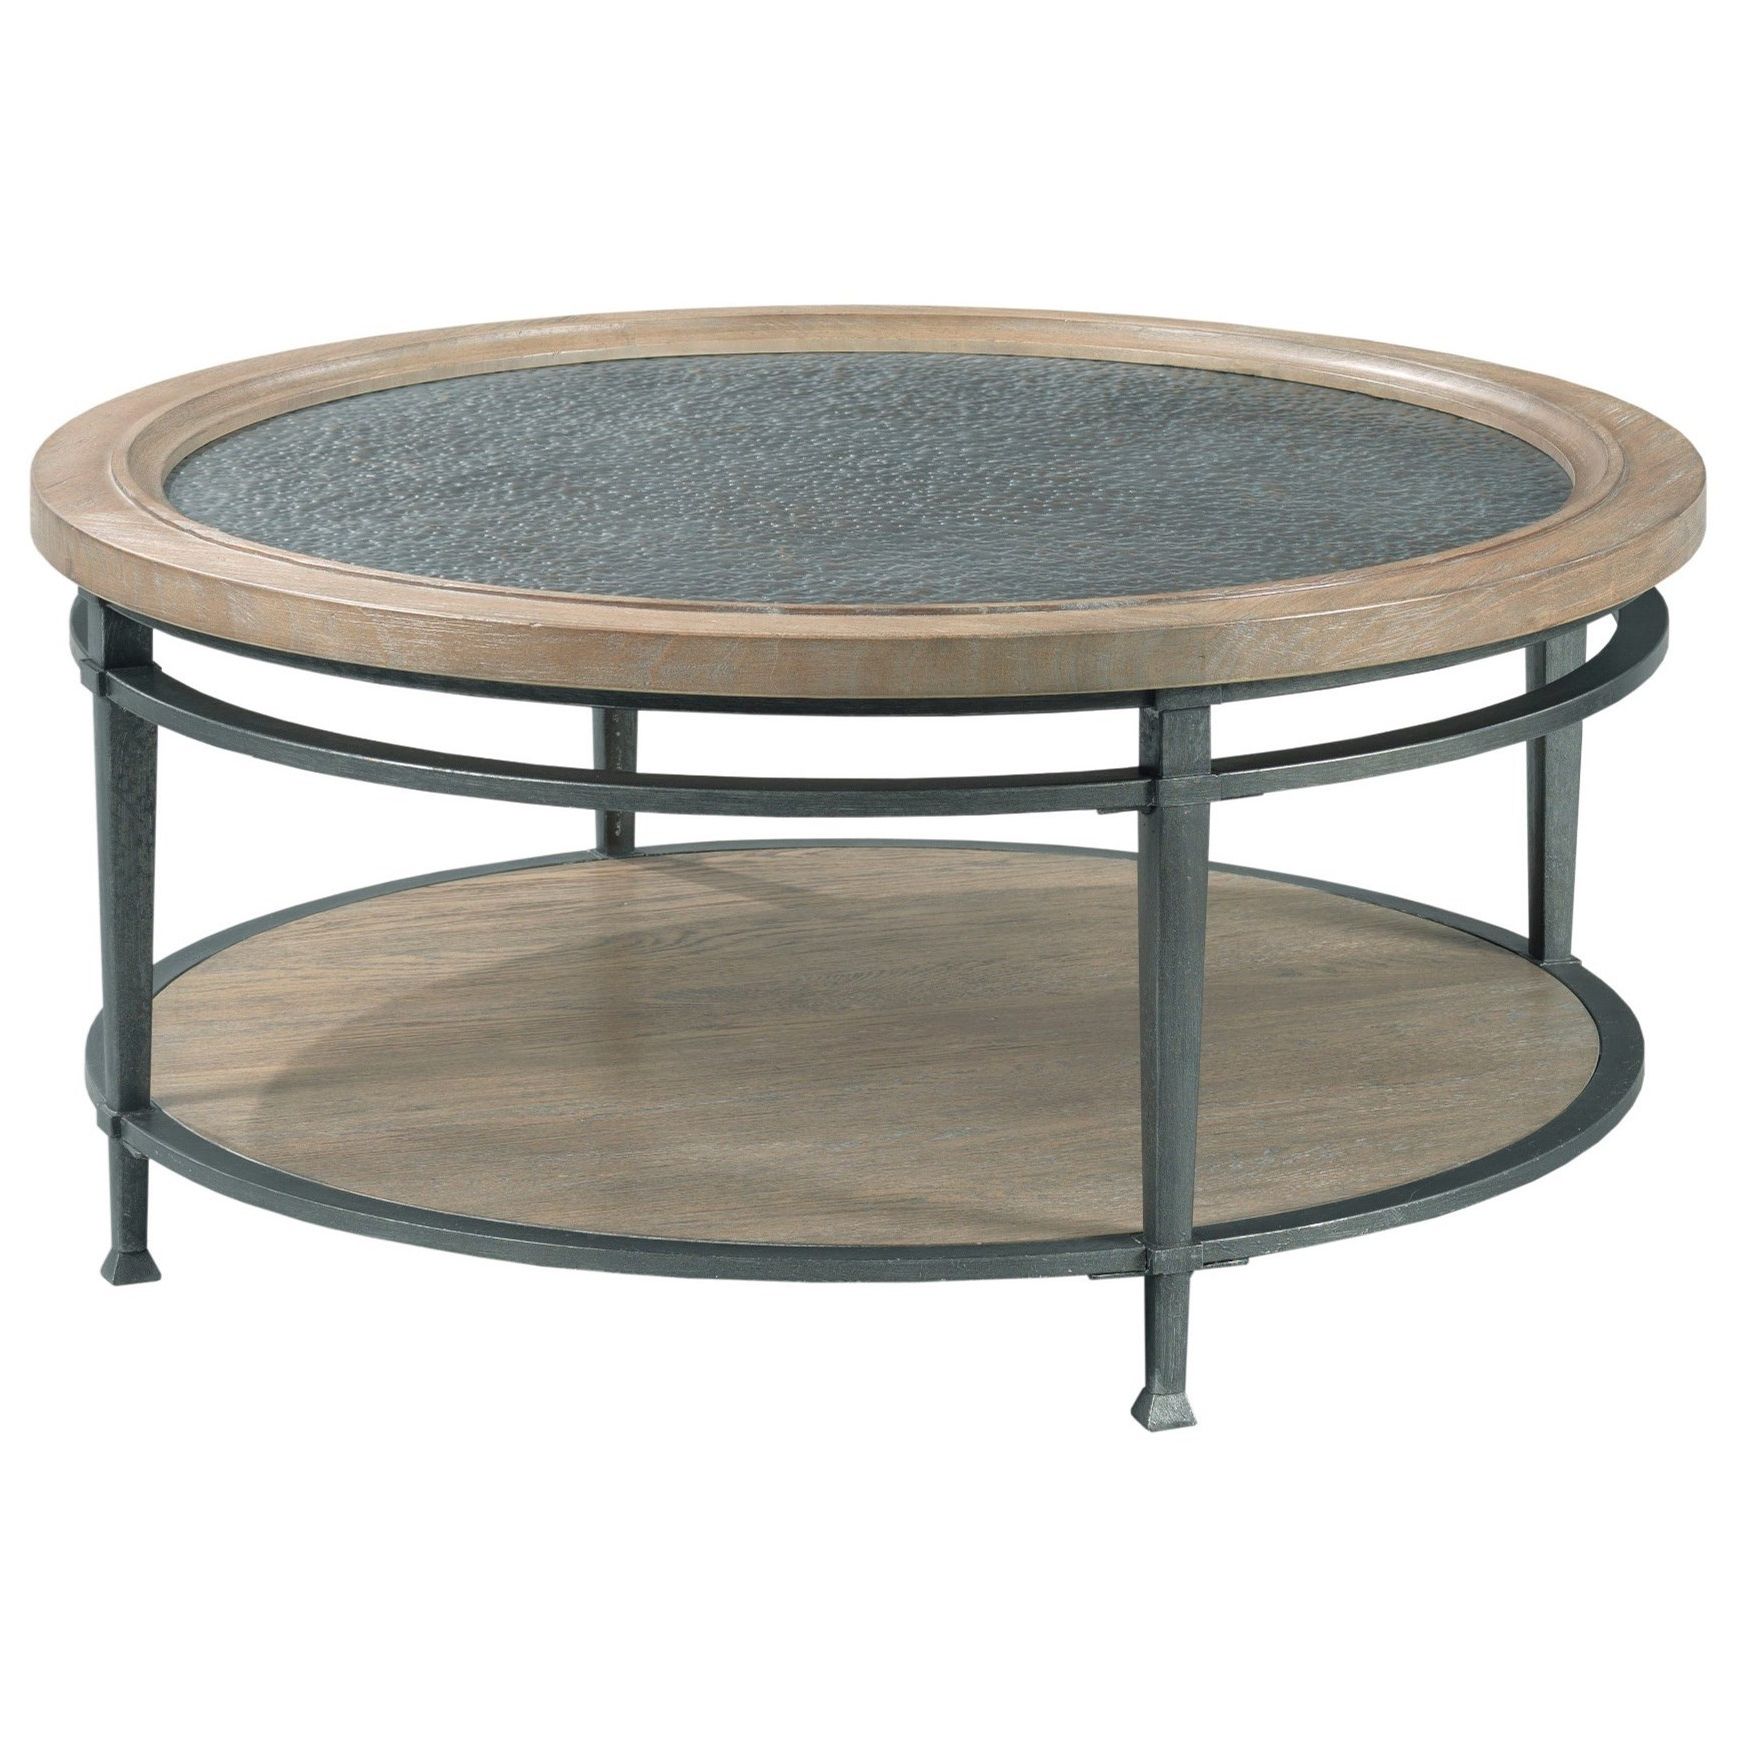 Hammary Austin Transitional Round Coffee Table | Wilson's Furniture With Regard To Monaco Round Coffee Tables (View 13 of 20)